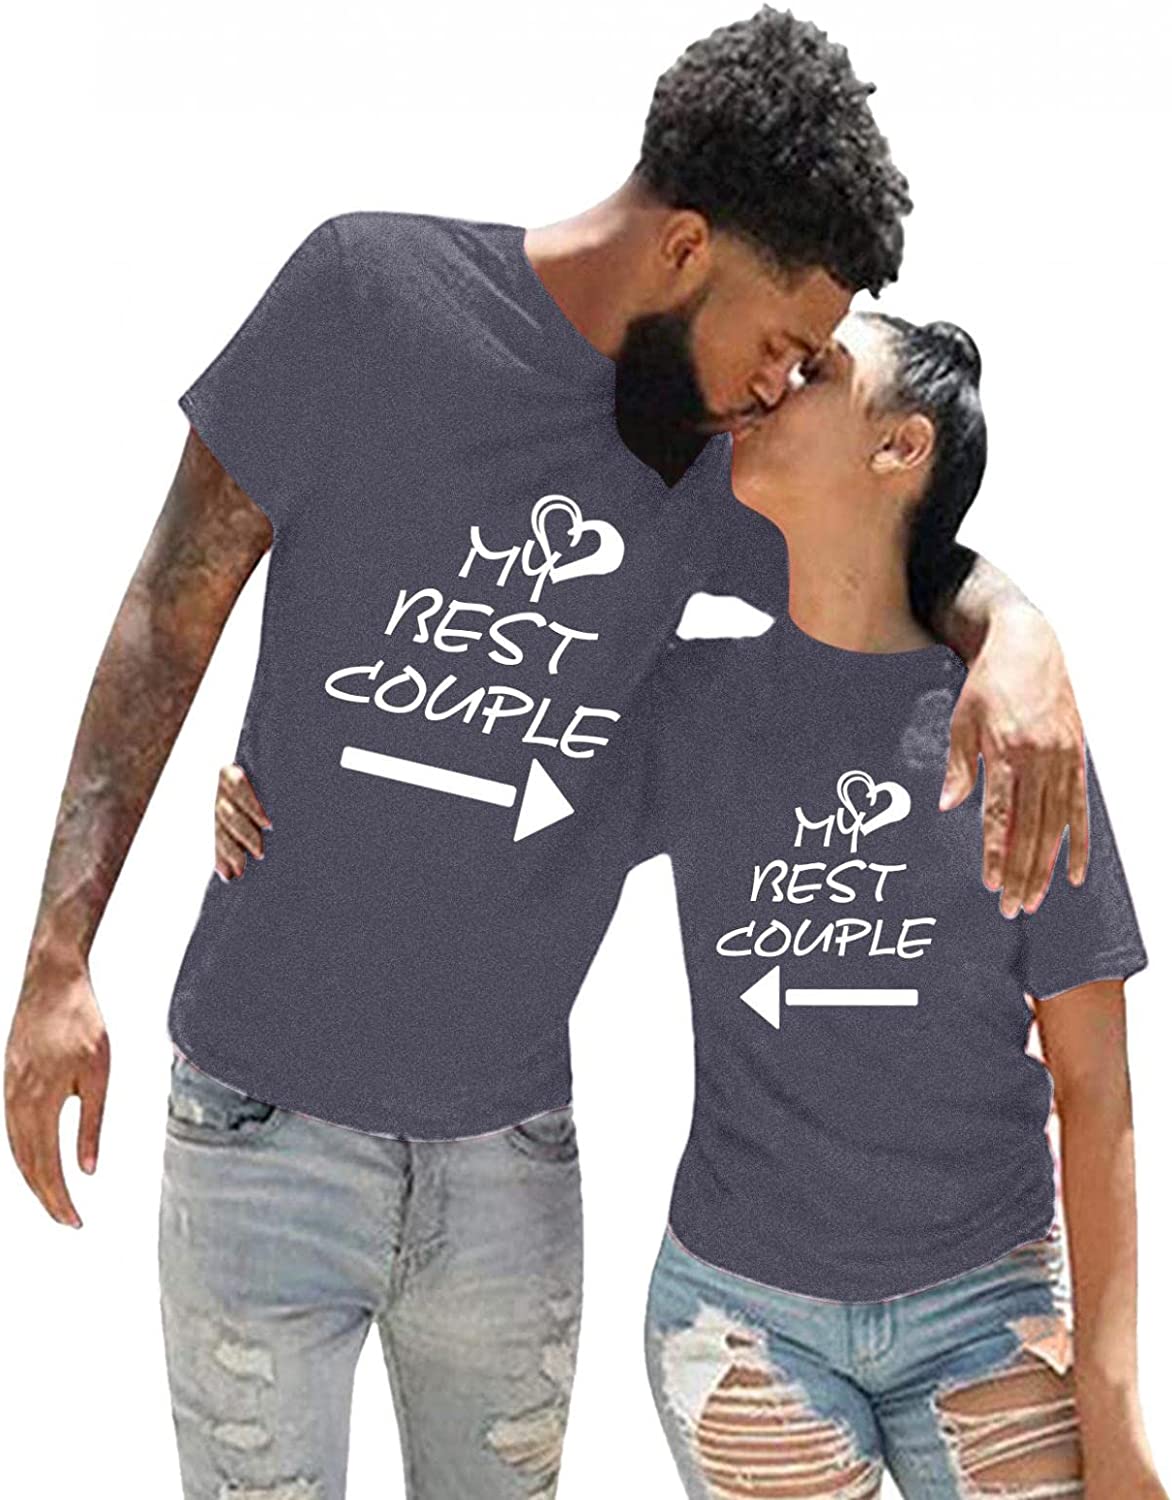 The Advantages Of Different Types Of Couple Shirts